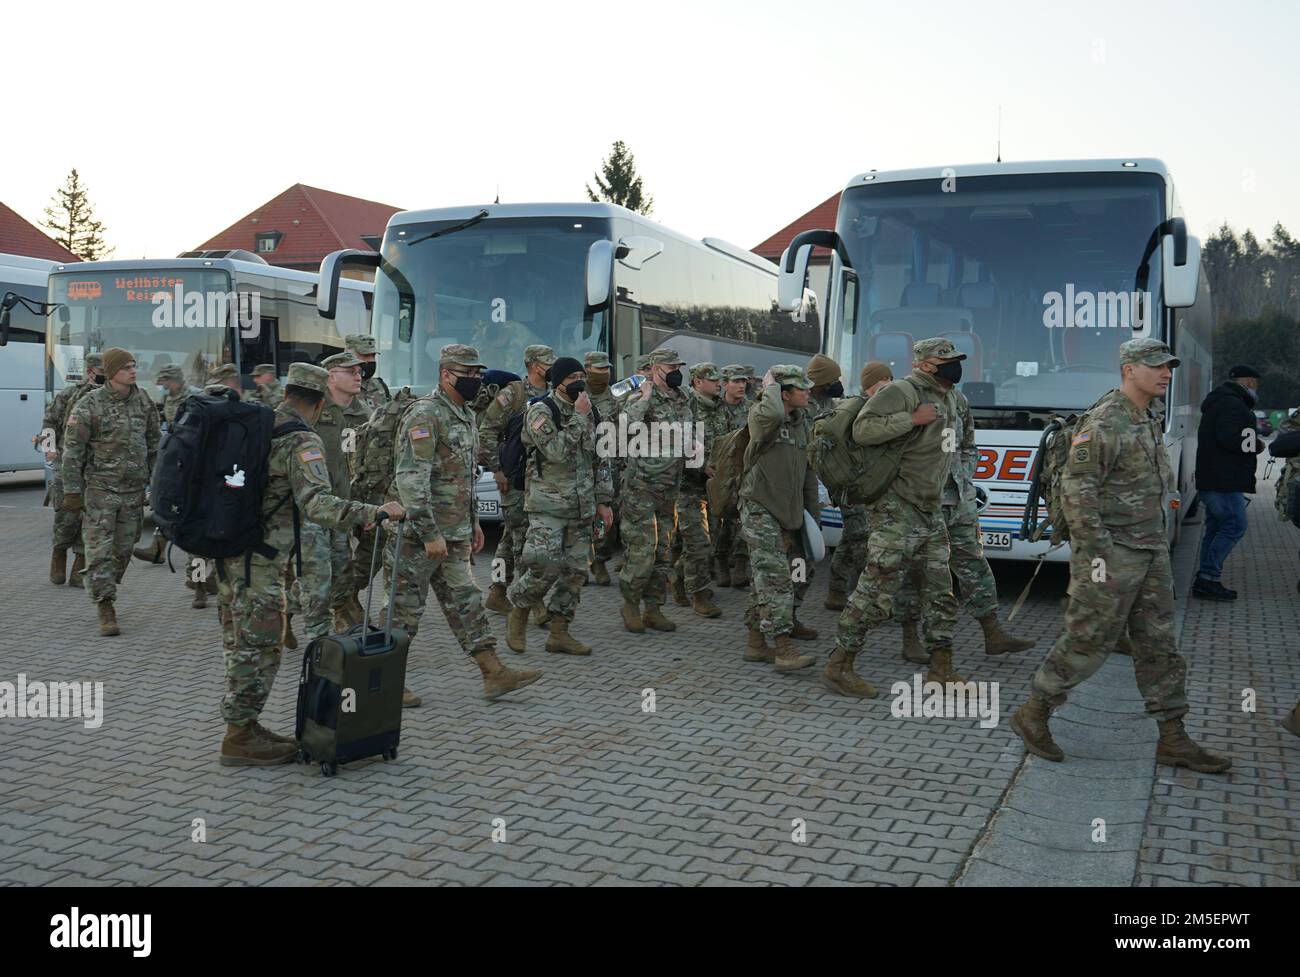 Soldiers from V Corps, Fort Knox, Ky., disembark from buses on Barton Barracks, Ansbach, Germany, March 8, 2022, as part of a deployment to Germany to build readiness, improve interoperability, reinforce allies and deter further Russian aggression. The deployment of U.S. forces here is a prudent measure that underpins NATO’s collective war-prevention aims, defensive orientation and commitment to protect all Allies. Stock Photo